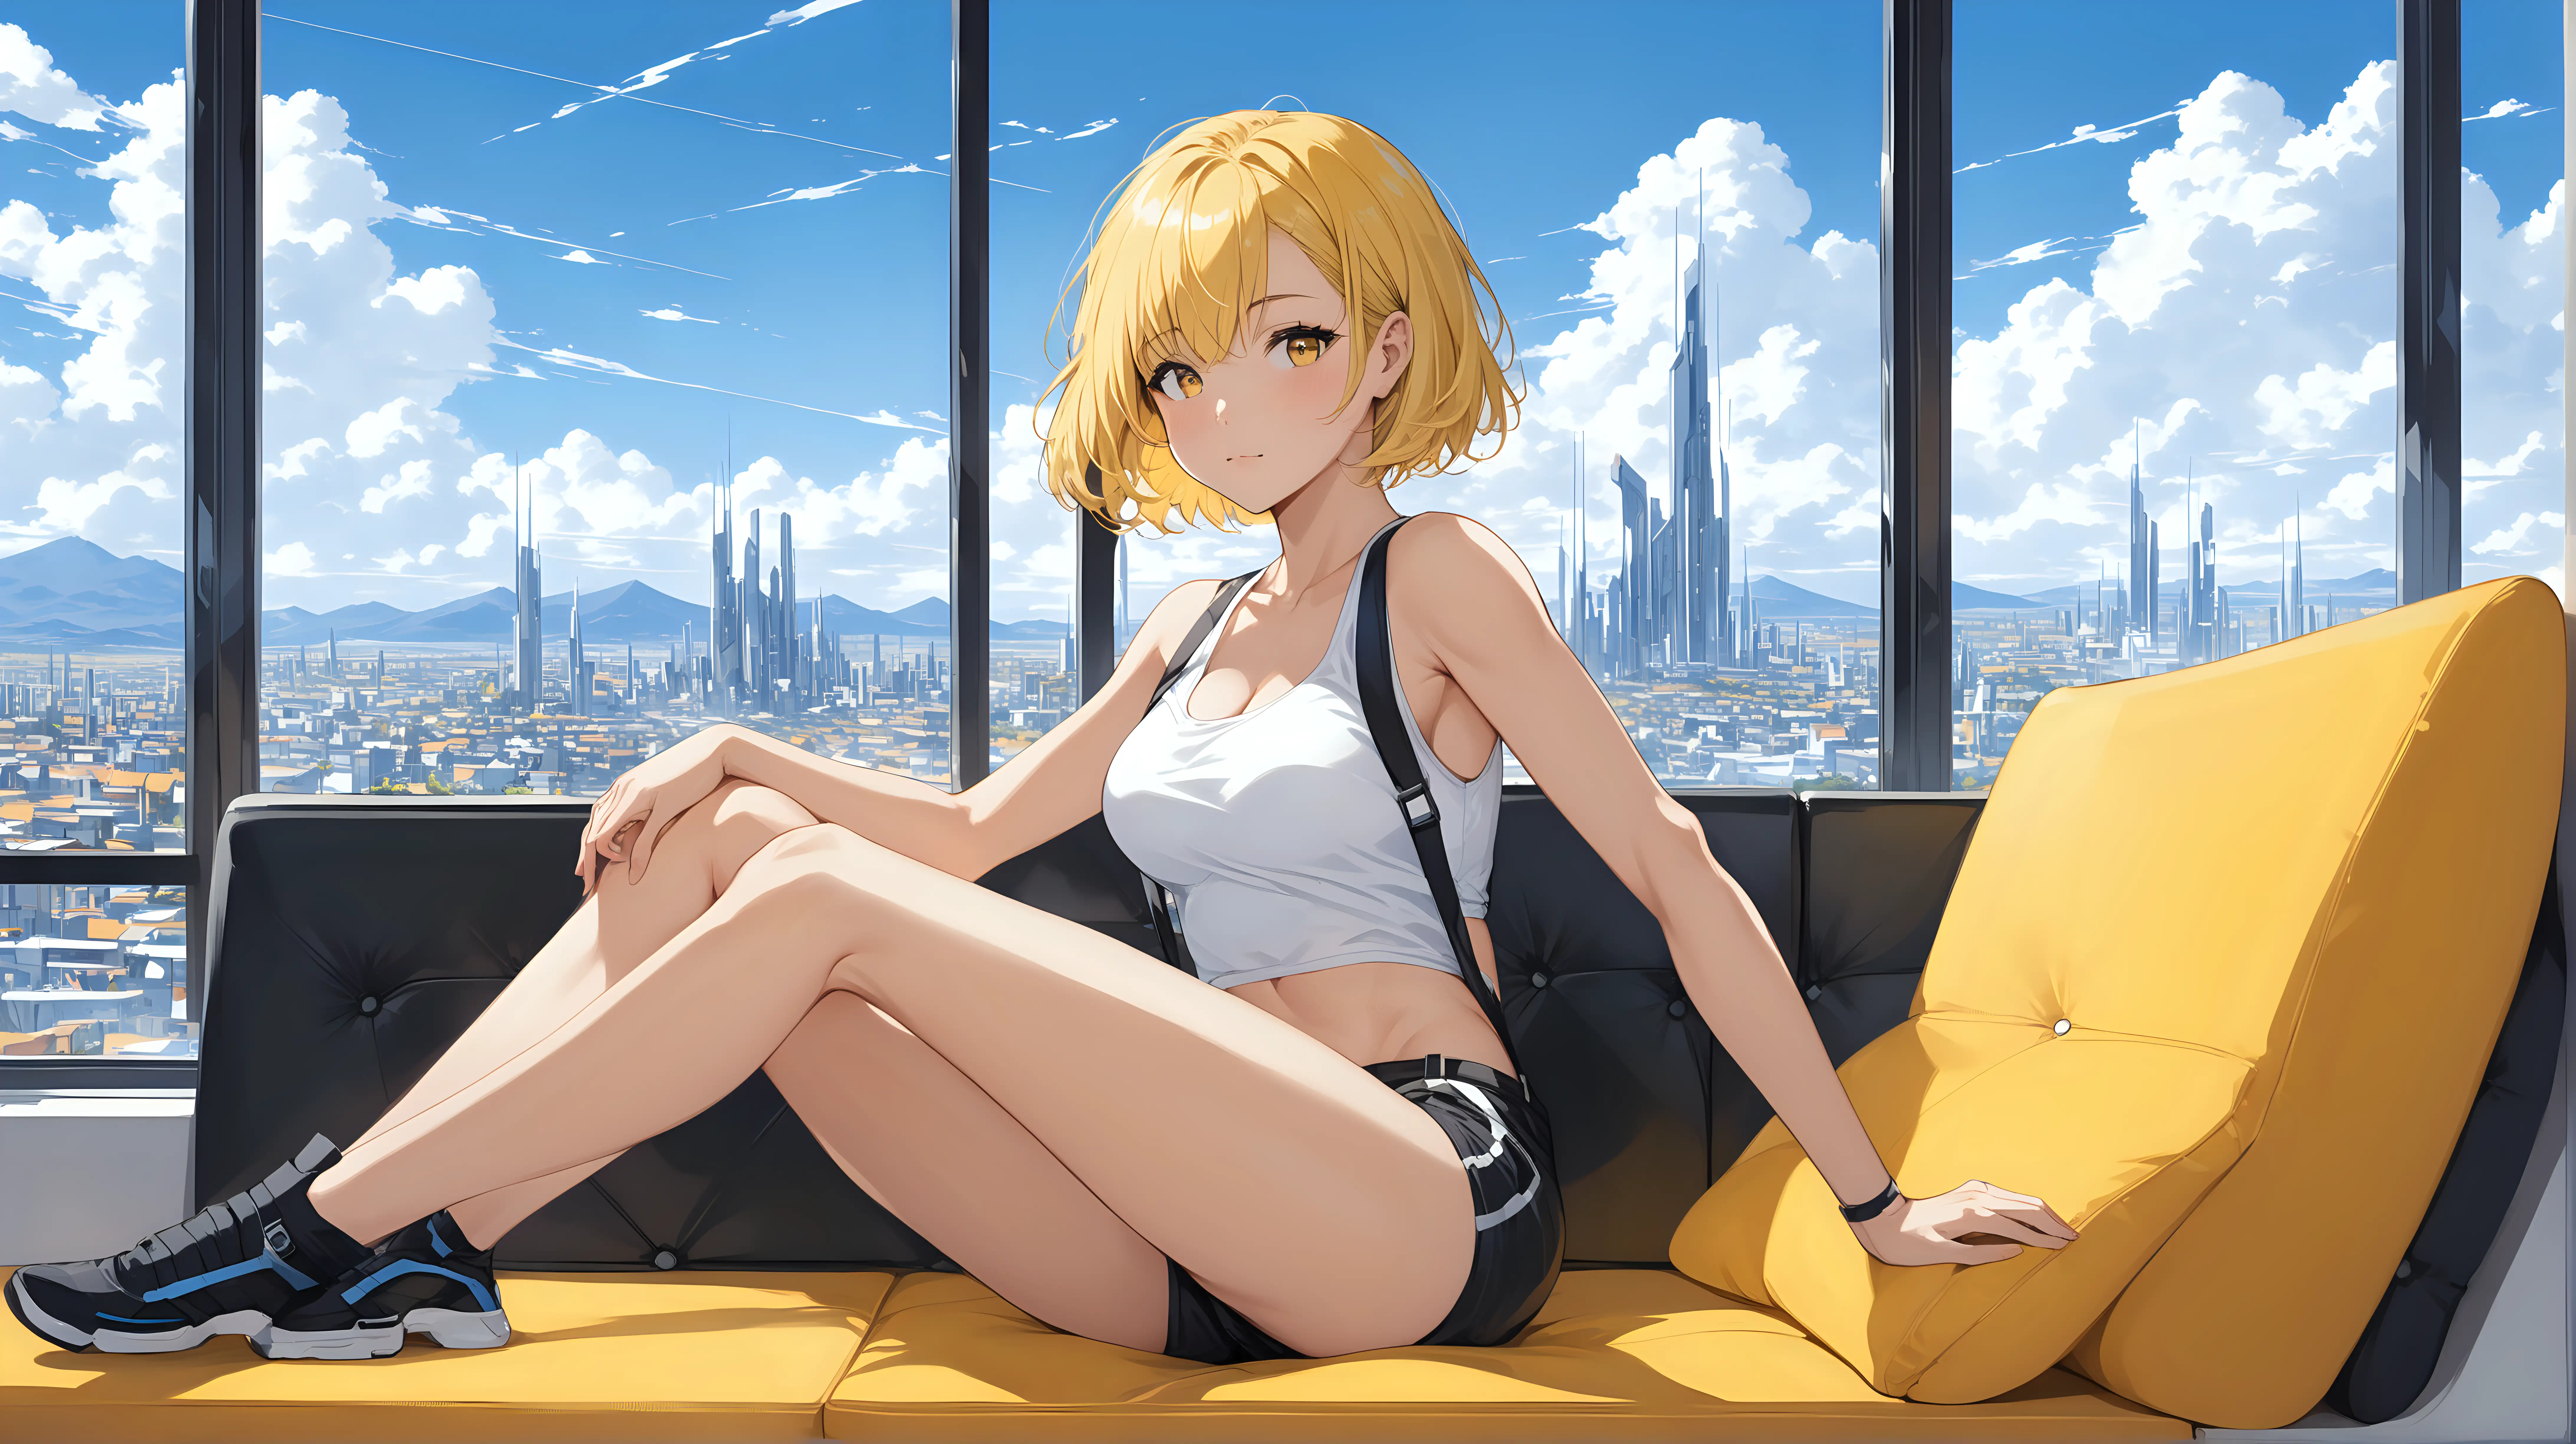 Futuristic Heroine Relaxing in Chic Apartment with Cityscape View